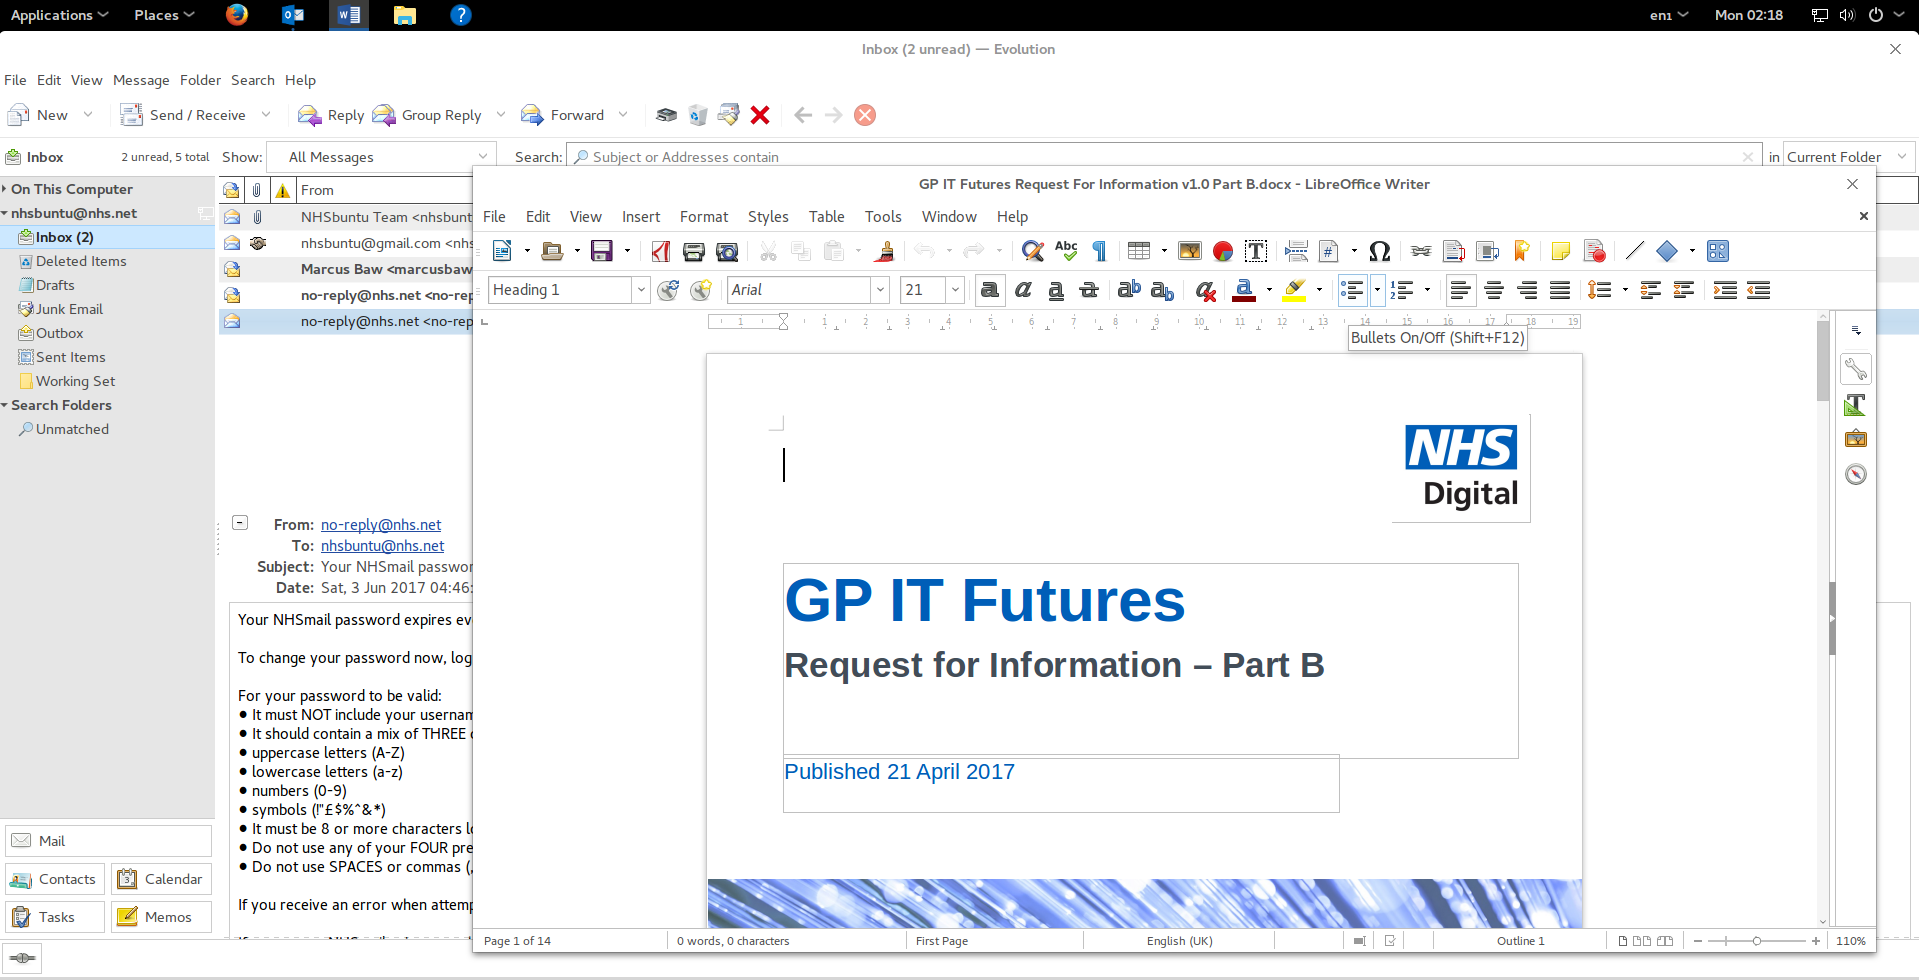 Screenshot of NHoS desktop showing Evolution mail client working with NHSmail and Libre Office Writter with an open document created in Microsoft Word.